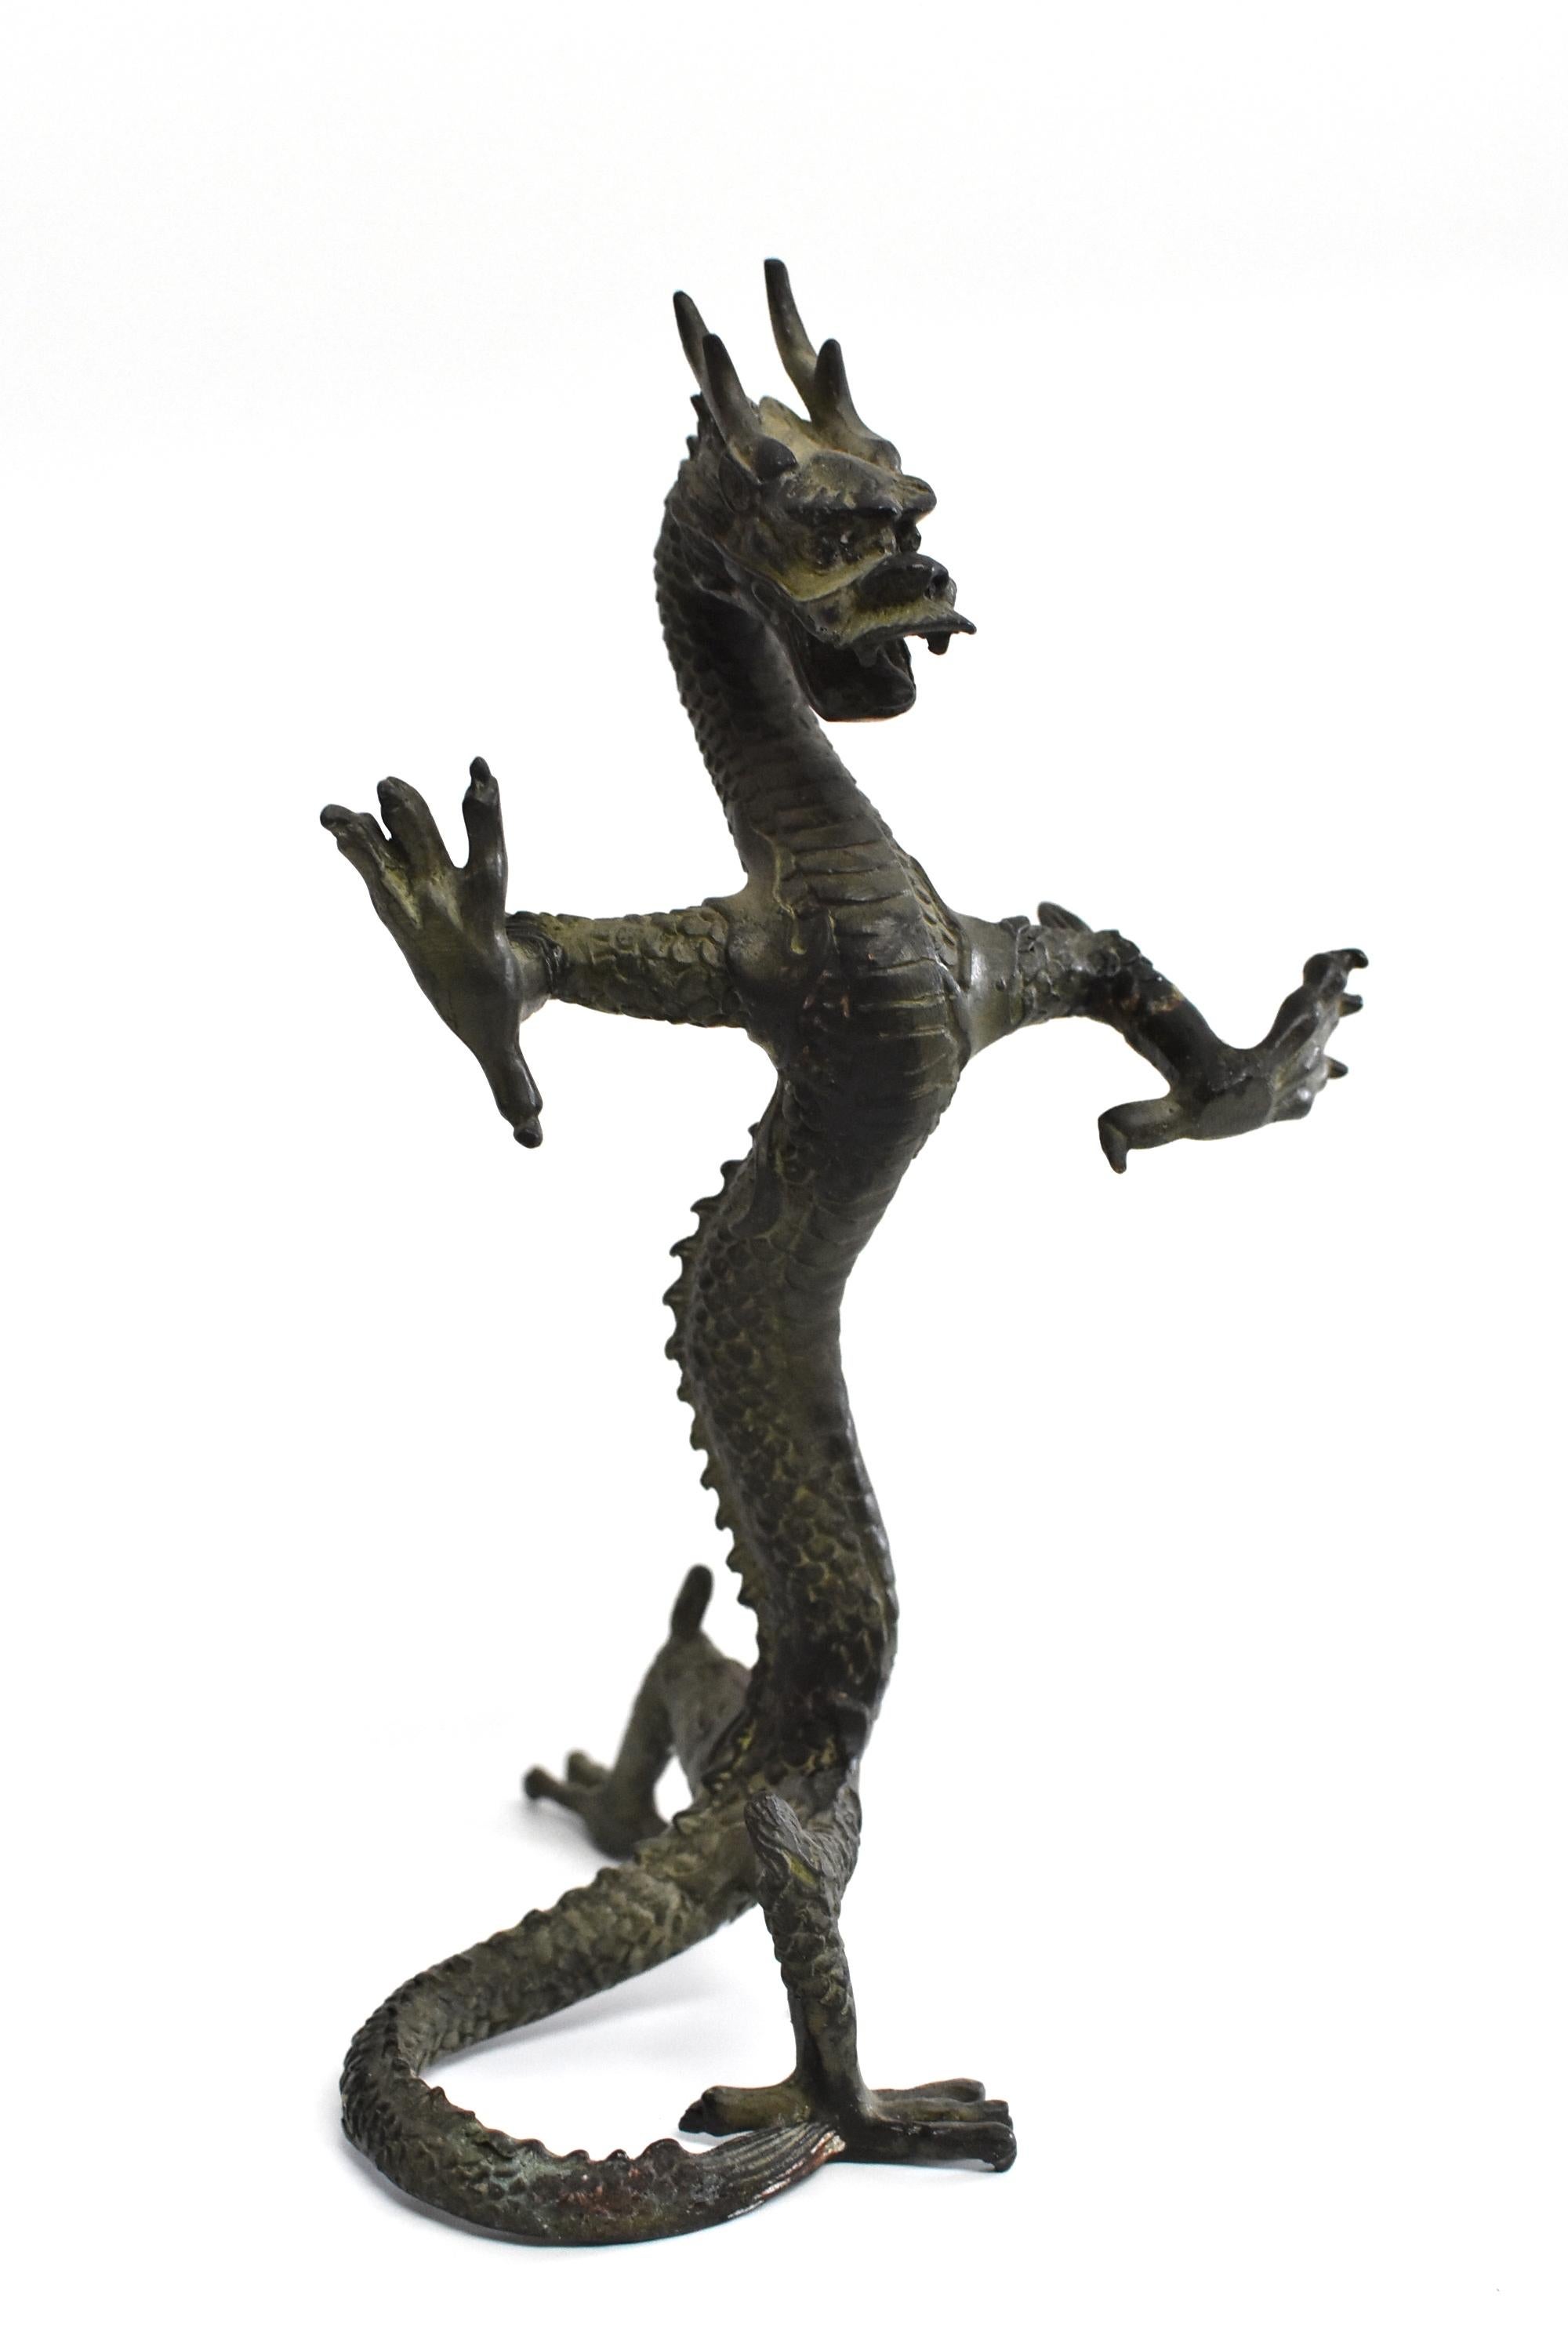 The sign of Emperor, Dragon is the symbol of power, leadership and prosperity in the Chinese culture. This is an unique piece with a standing dragon. Fine details of scale, paws and horns reflect the maker's great skill. This piece depicts the